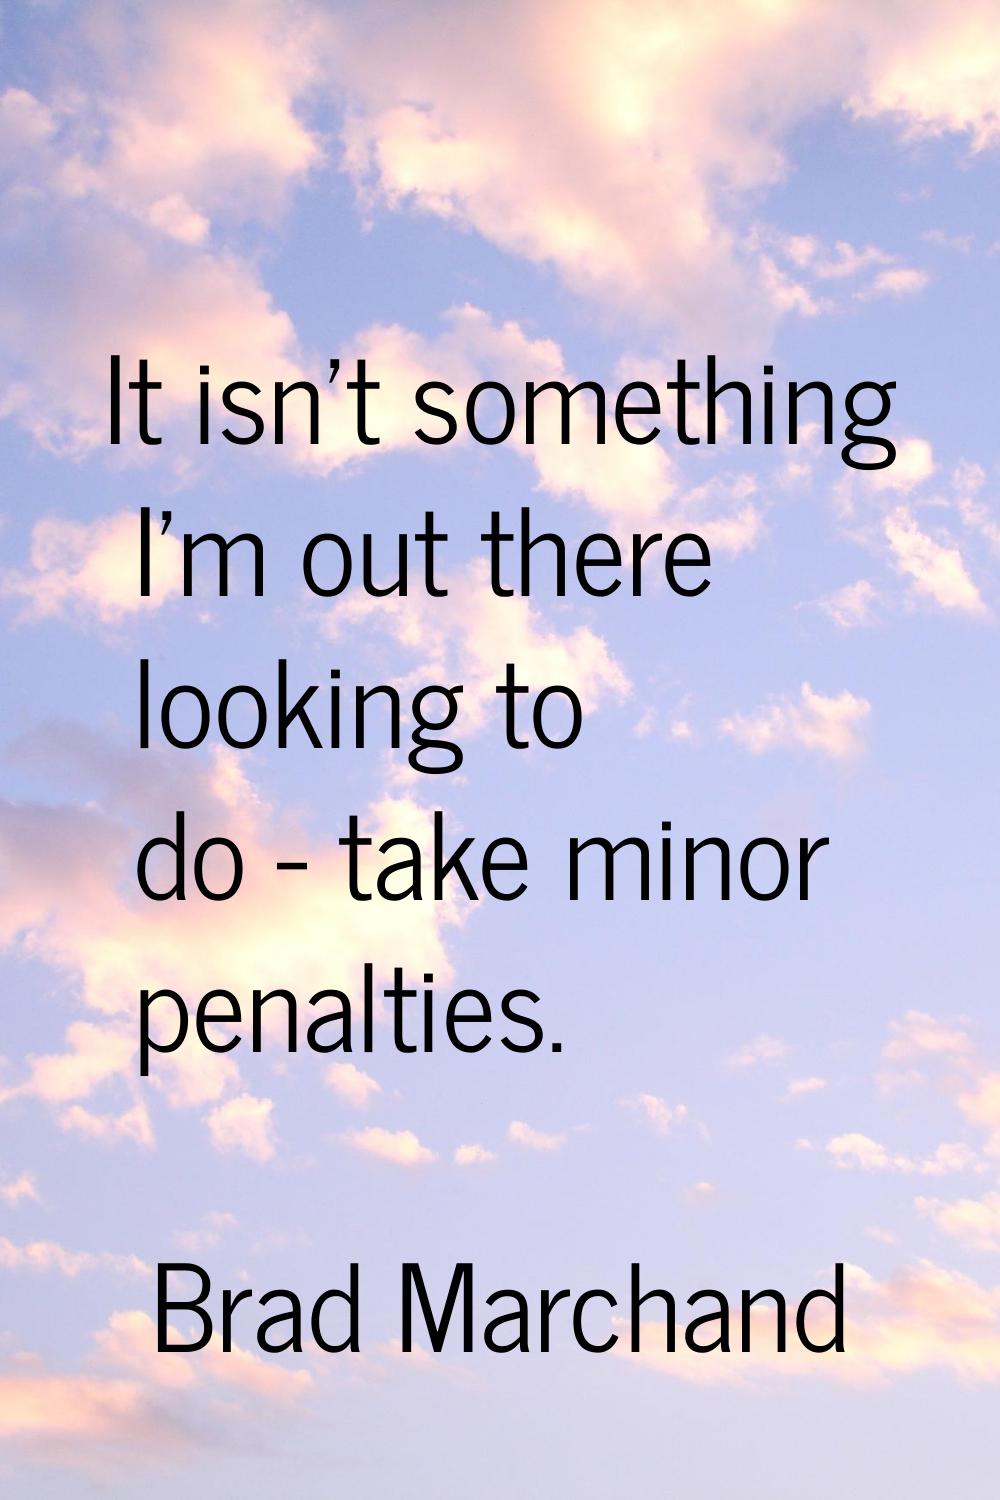 It isn't something I'm out there looking to do - take minor penalties.